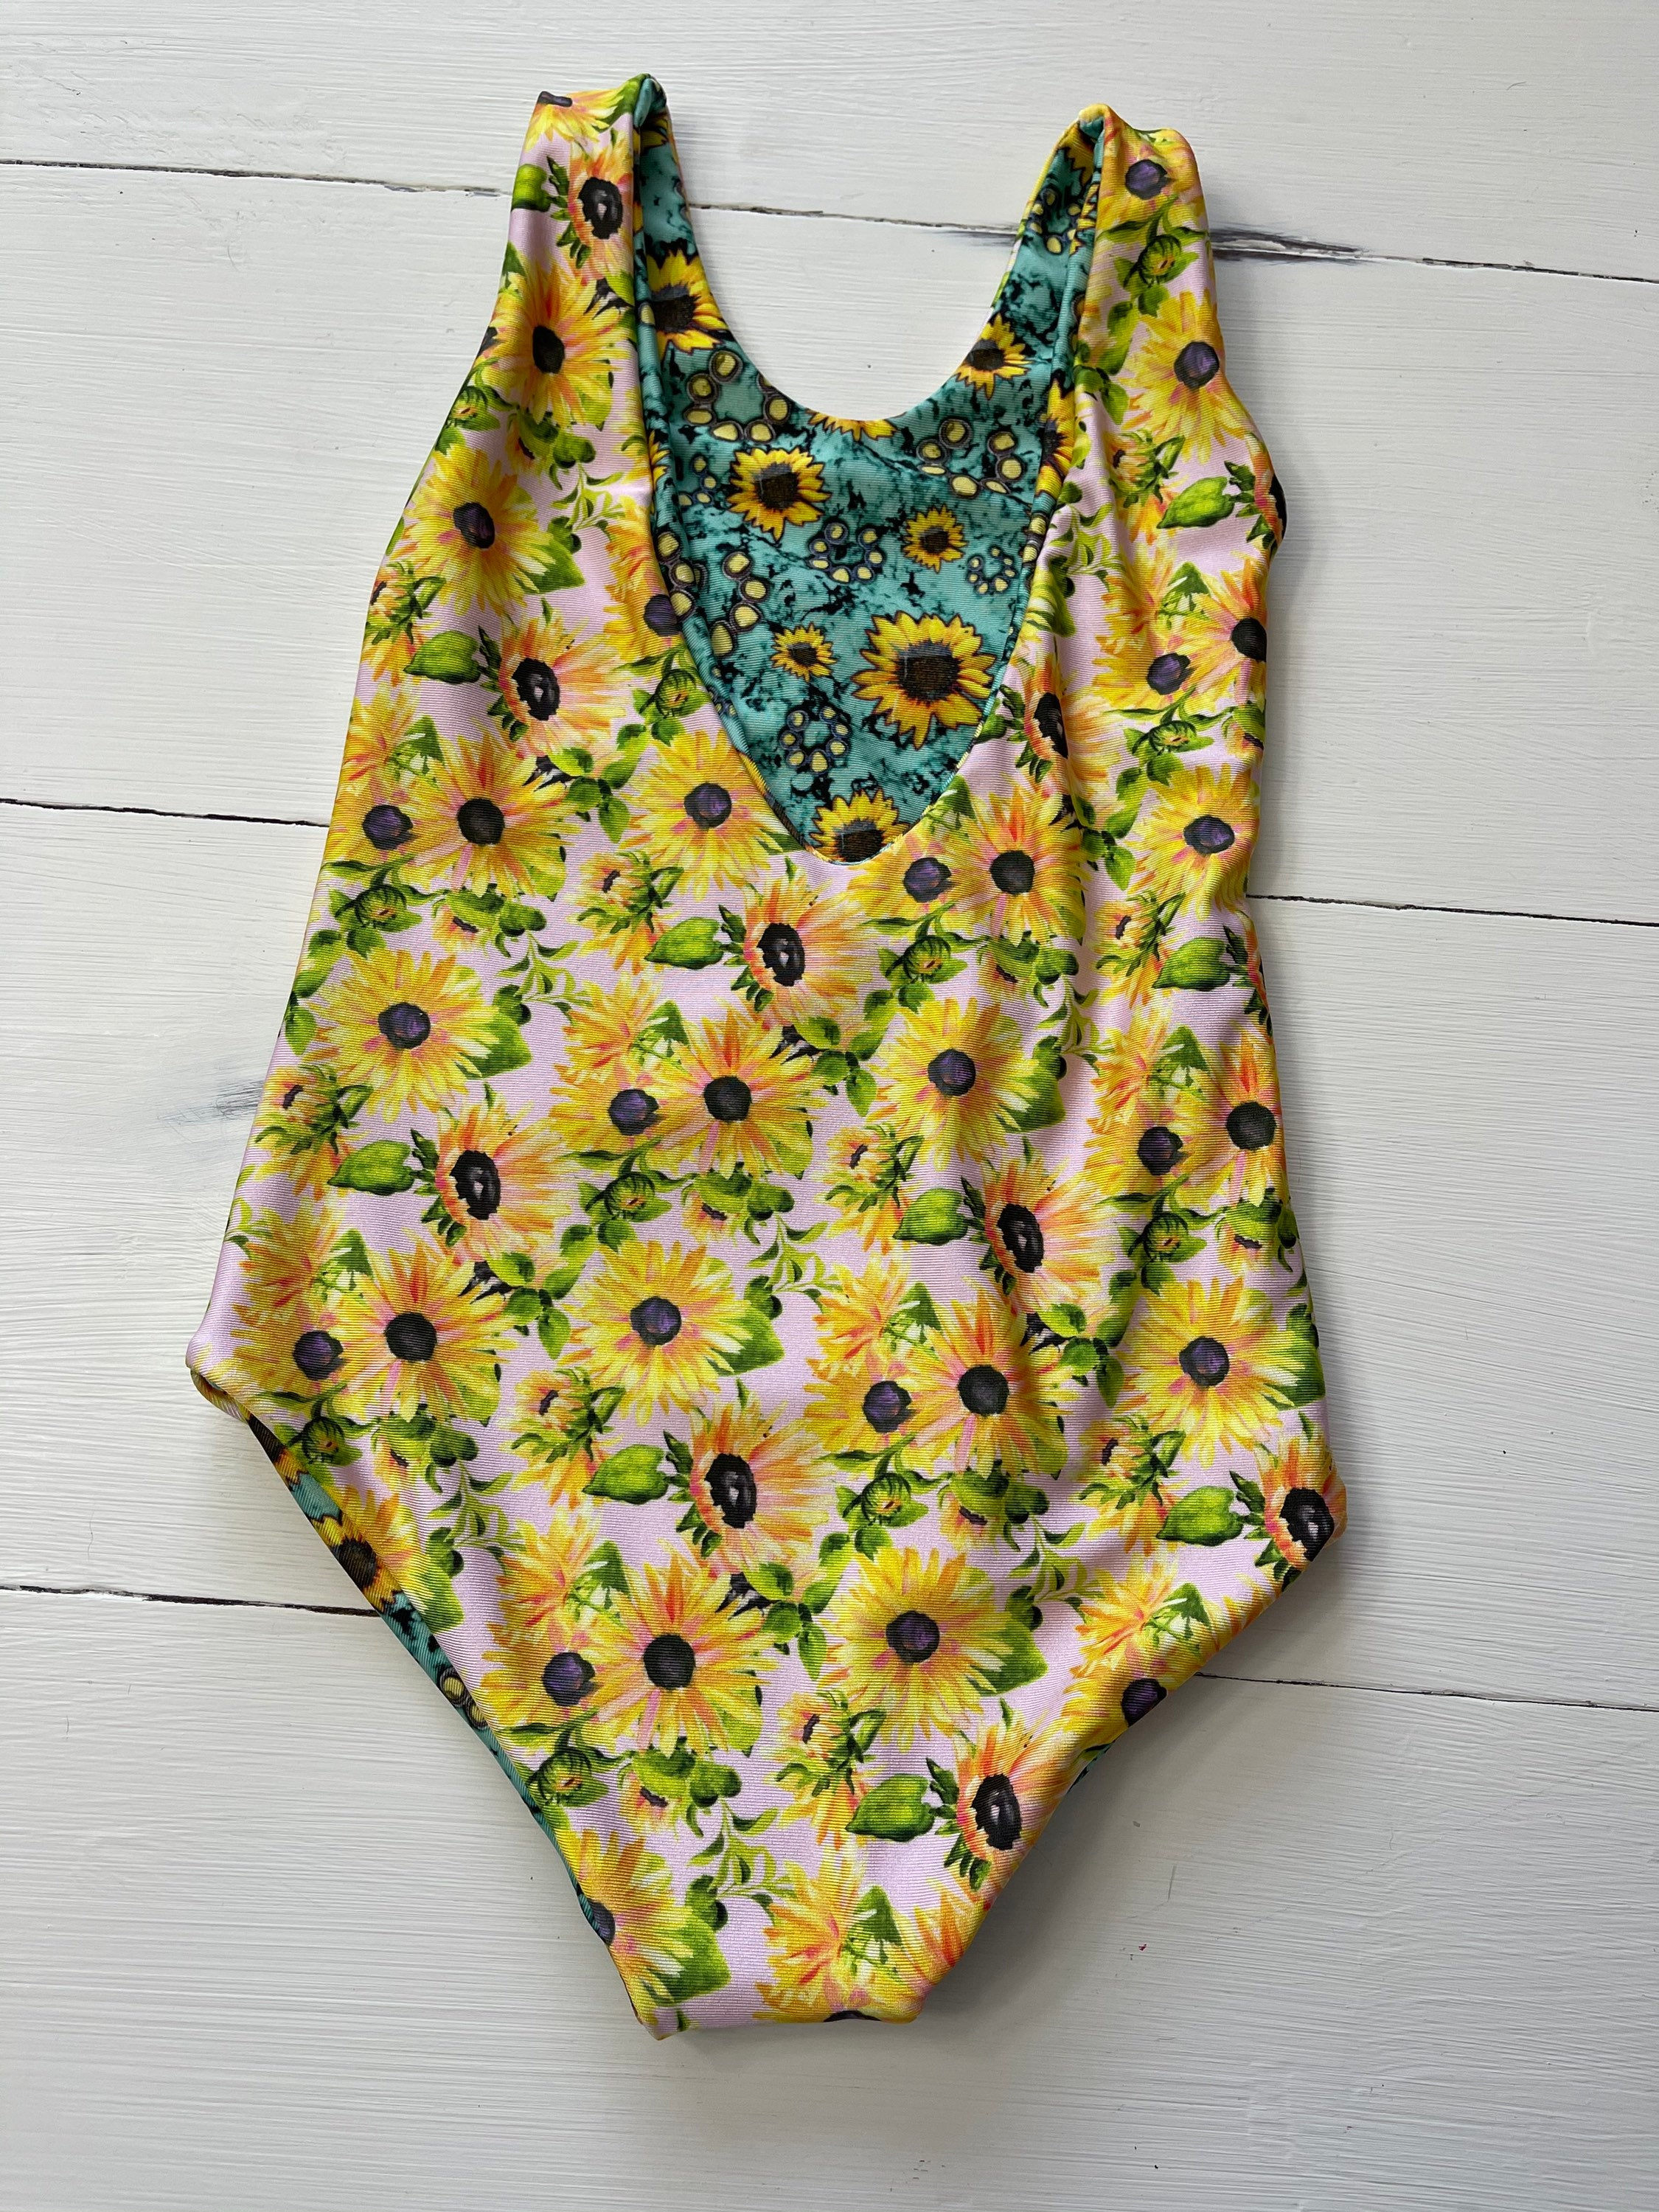 Sunflower Floral Reversible One Piece Swimsuit